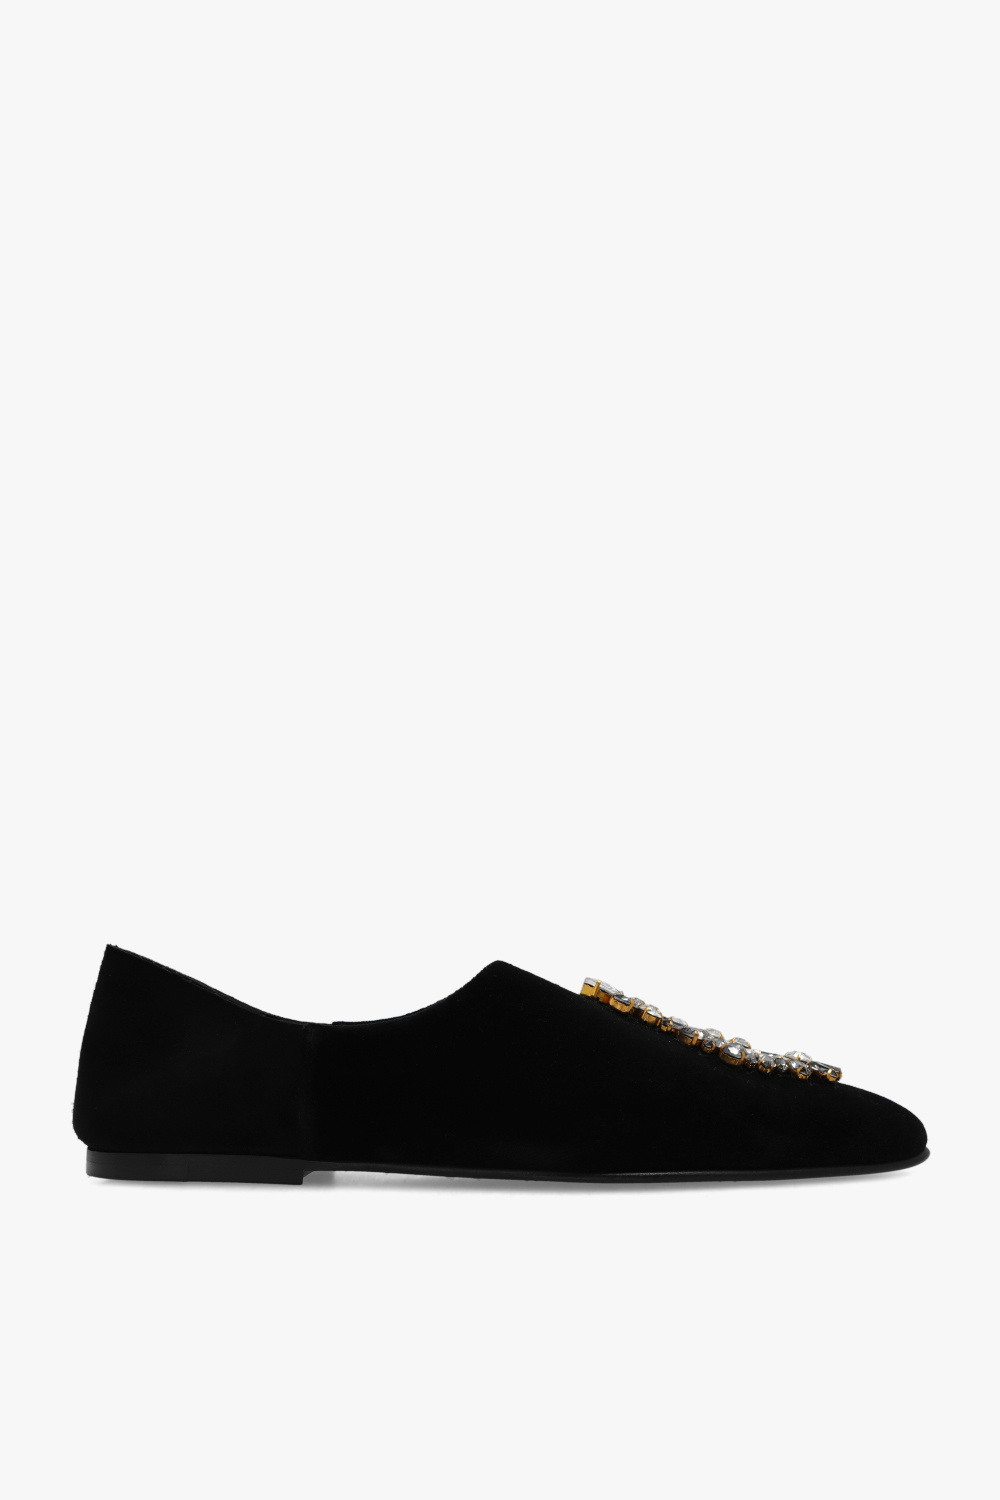 Dolce & Gabbana Slip-on White shoes with crystal appliqué